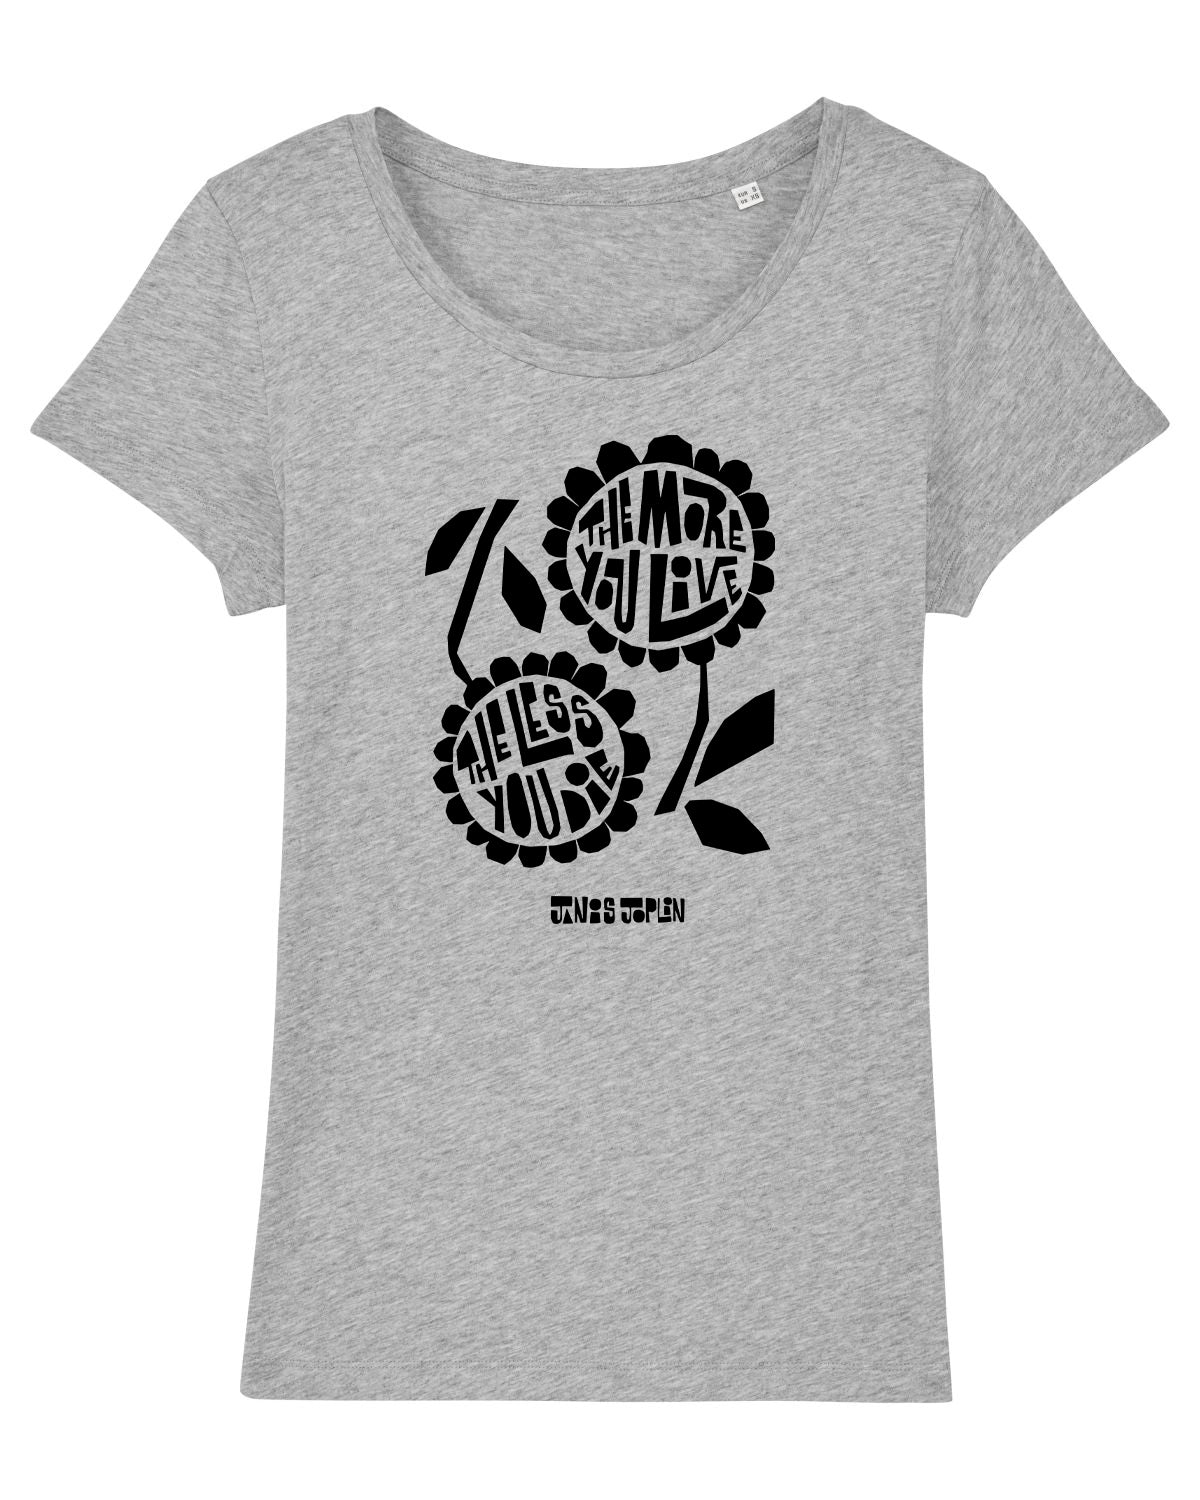 'The More You Live, The Less You Die' Organic Womens T-shirt